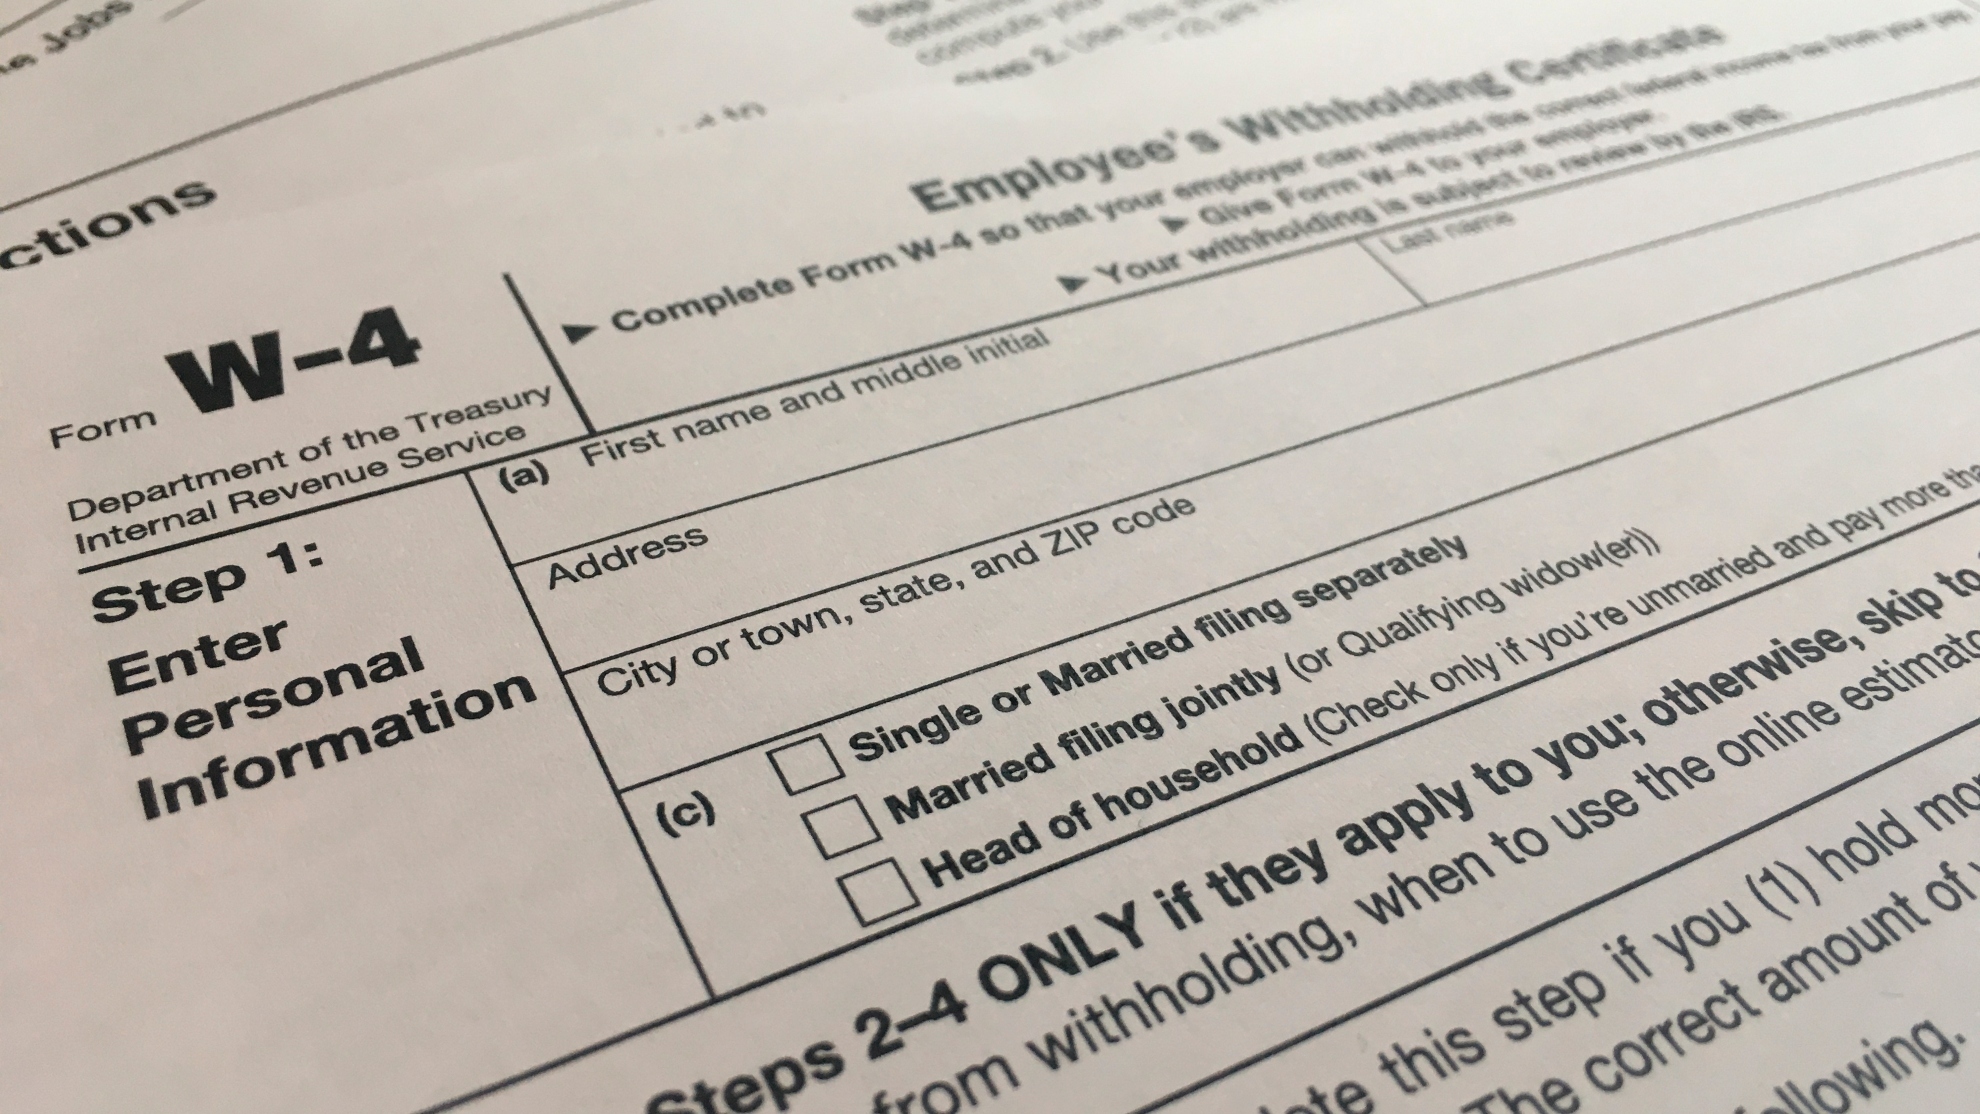 Irs Form Schedule 1 2022 Tax Season 2022: How To File Correctly Your Taxes (And Get Your Refunds  Faster)? | Marca